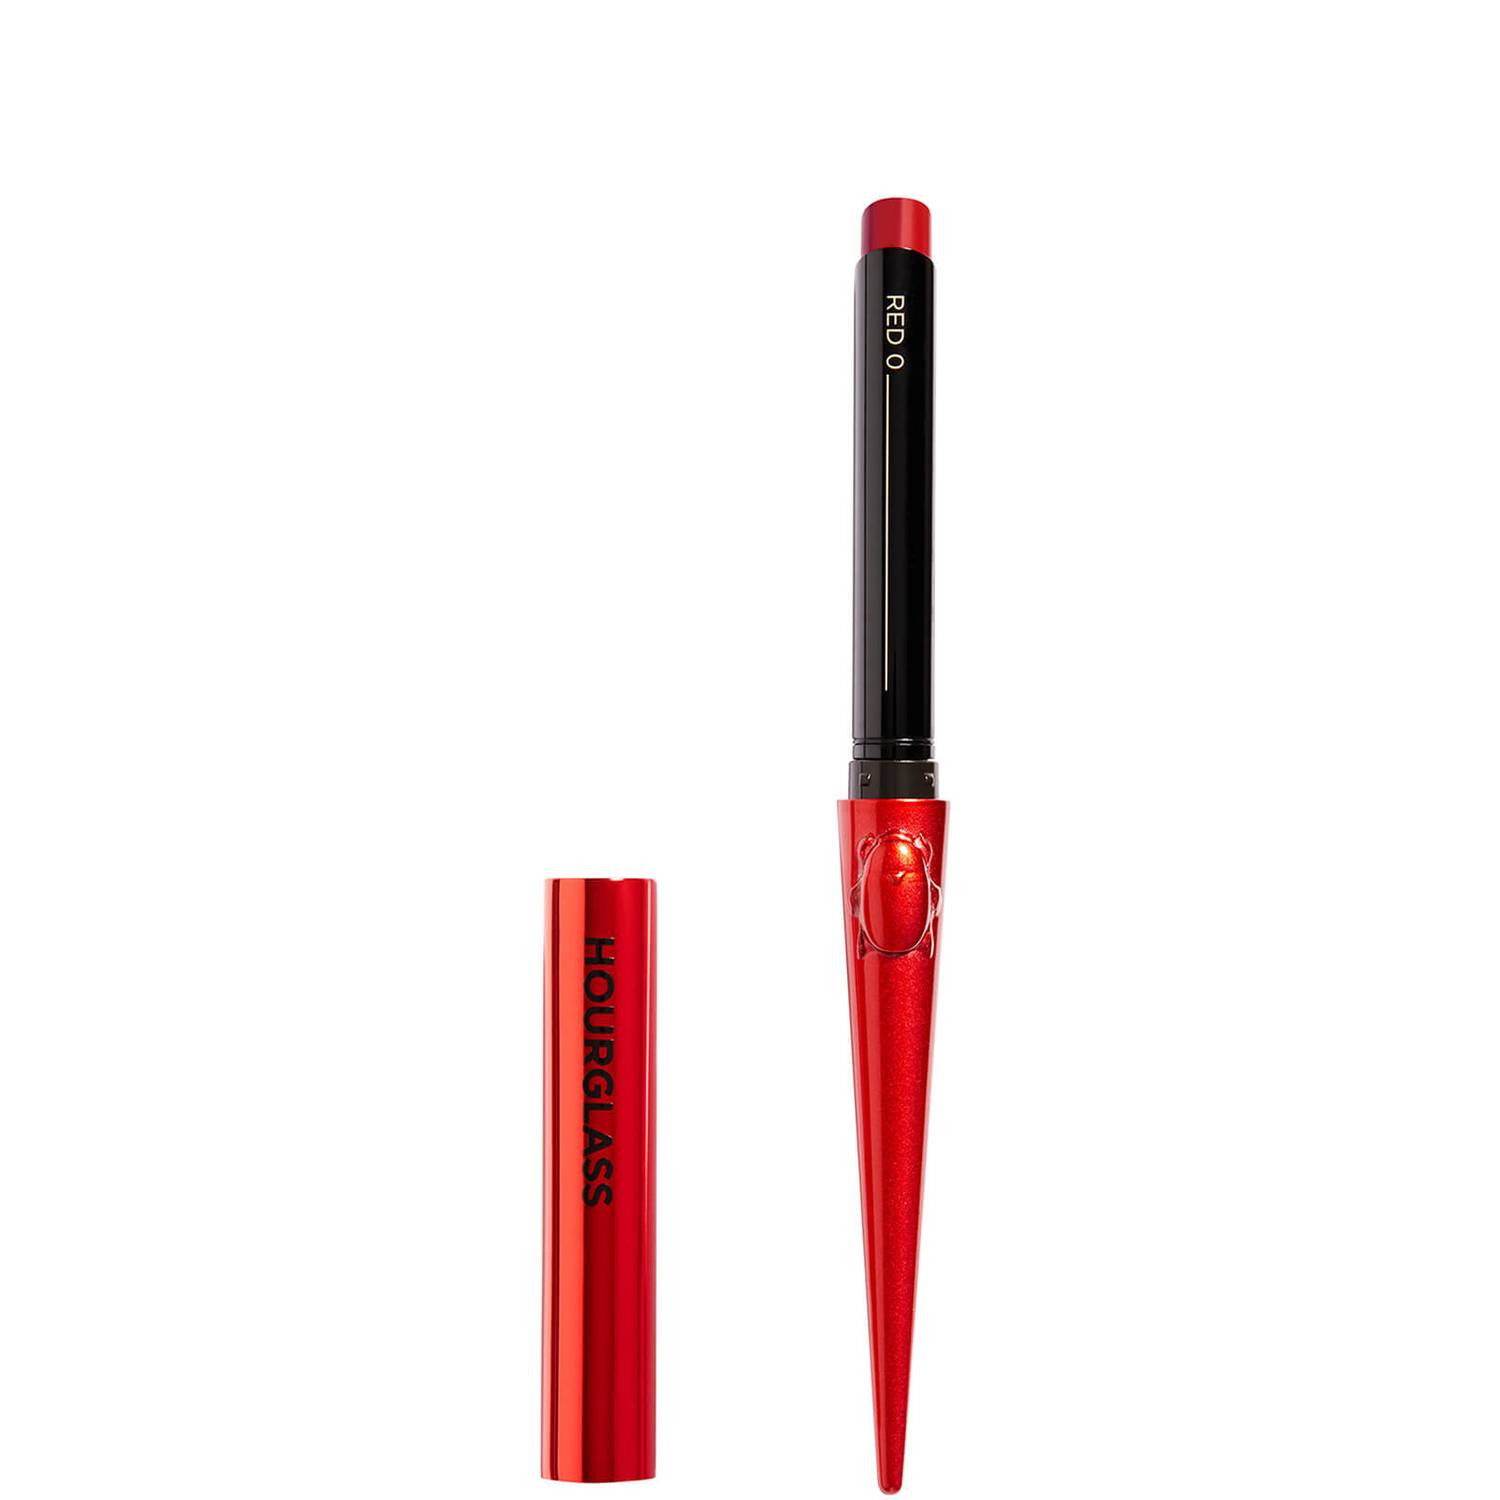 Hourglass Confession Ultra Slim High Intensity Refillable Lipstick in Red 0